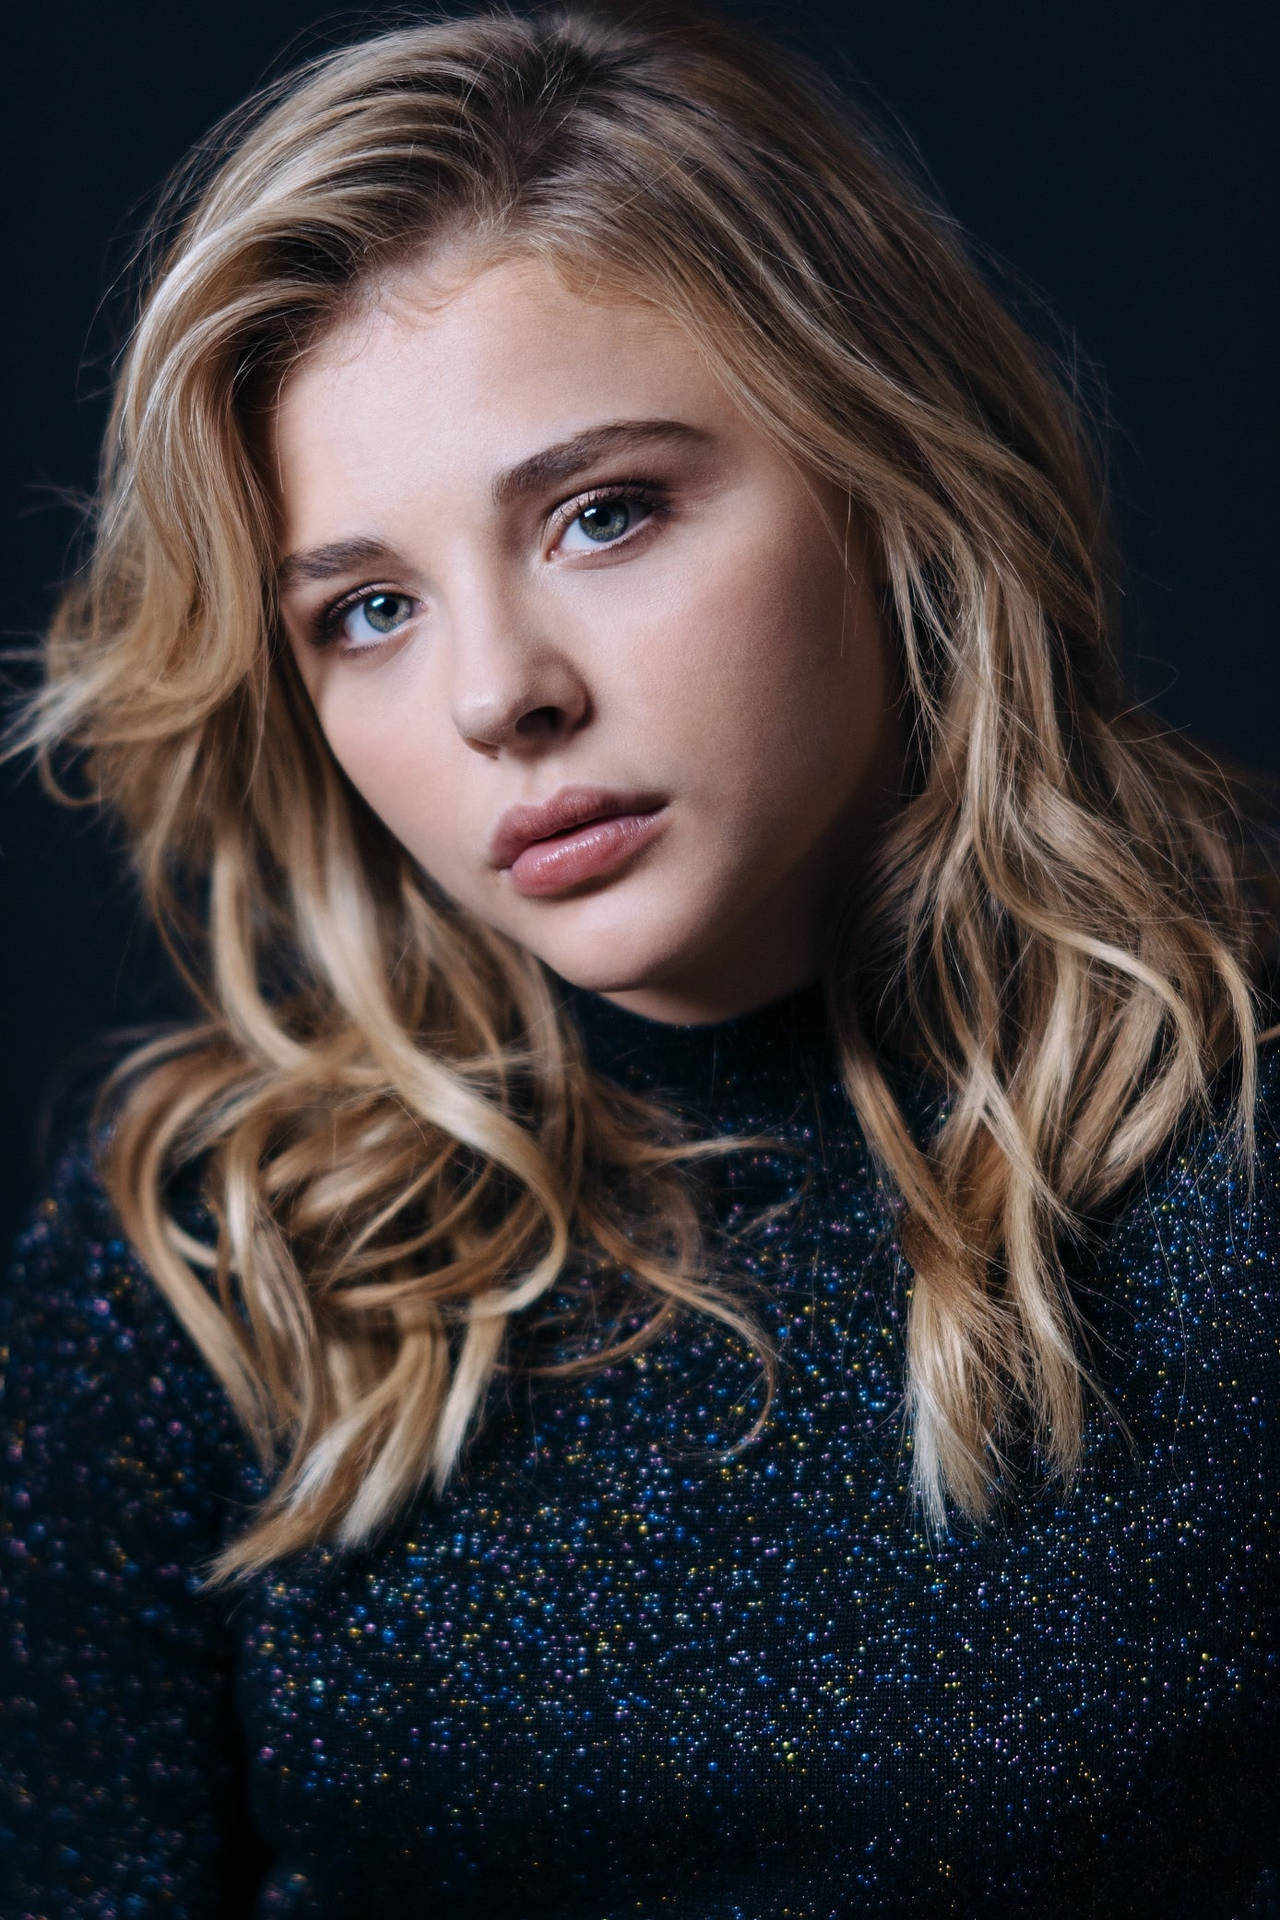 Download Chloë Grace Moretz wallpapers for mobile phone, free